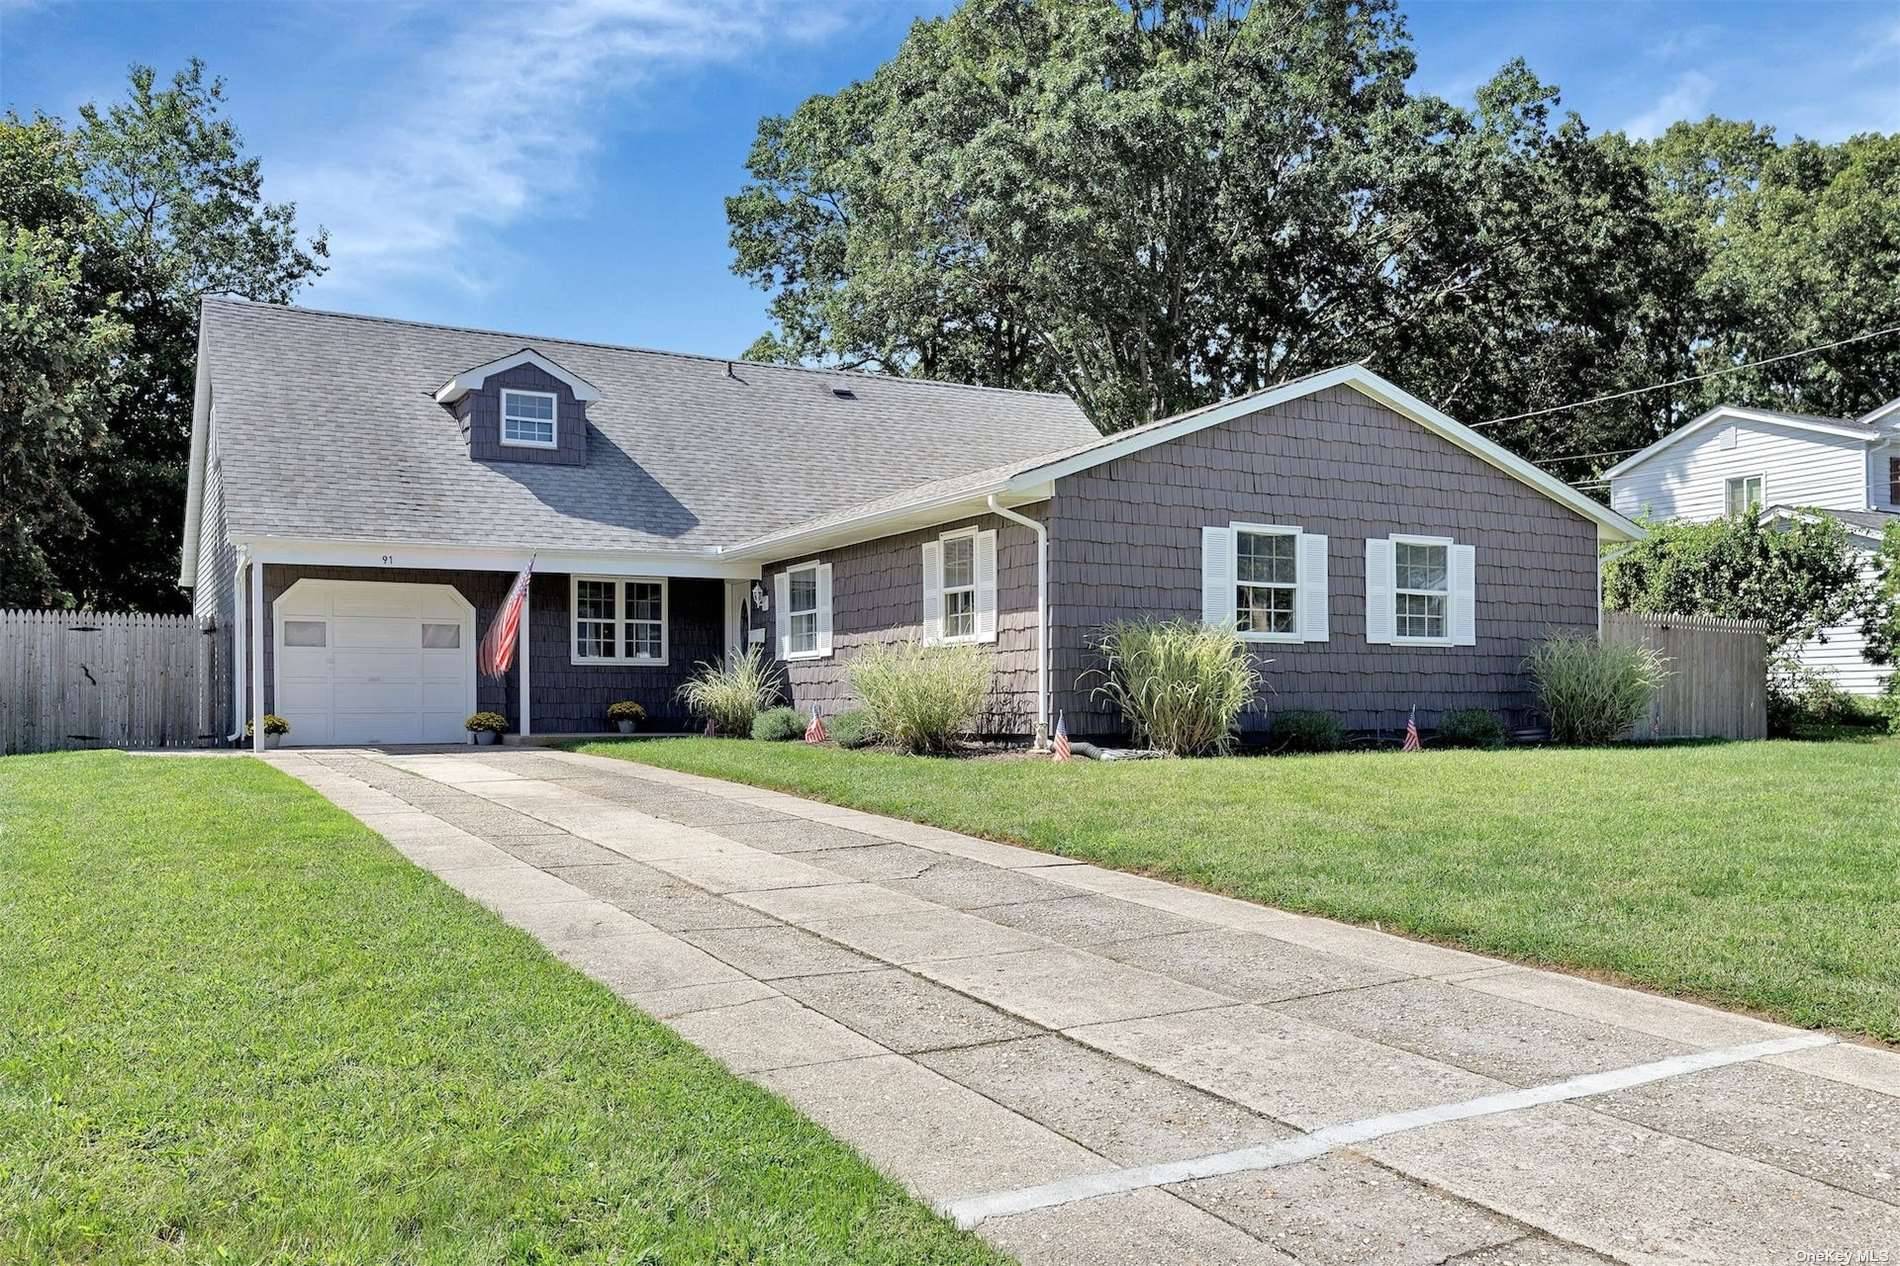 This spacious 4 bedroom, 2 full bath home has enjoyed many recent updates, including New Kitchen, Flooring, CAC, Heating, Vinyl Siding, Gutters, IGS, 200 amp electric and more !